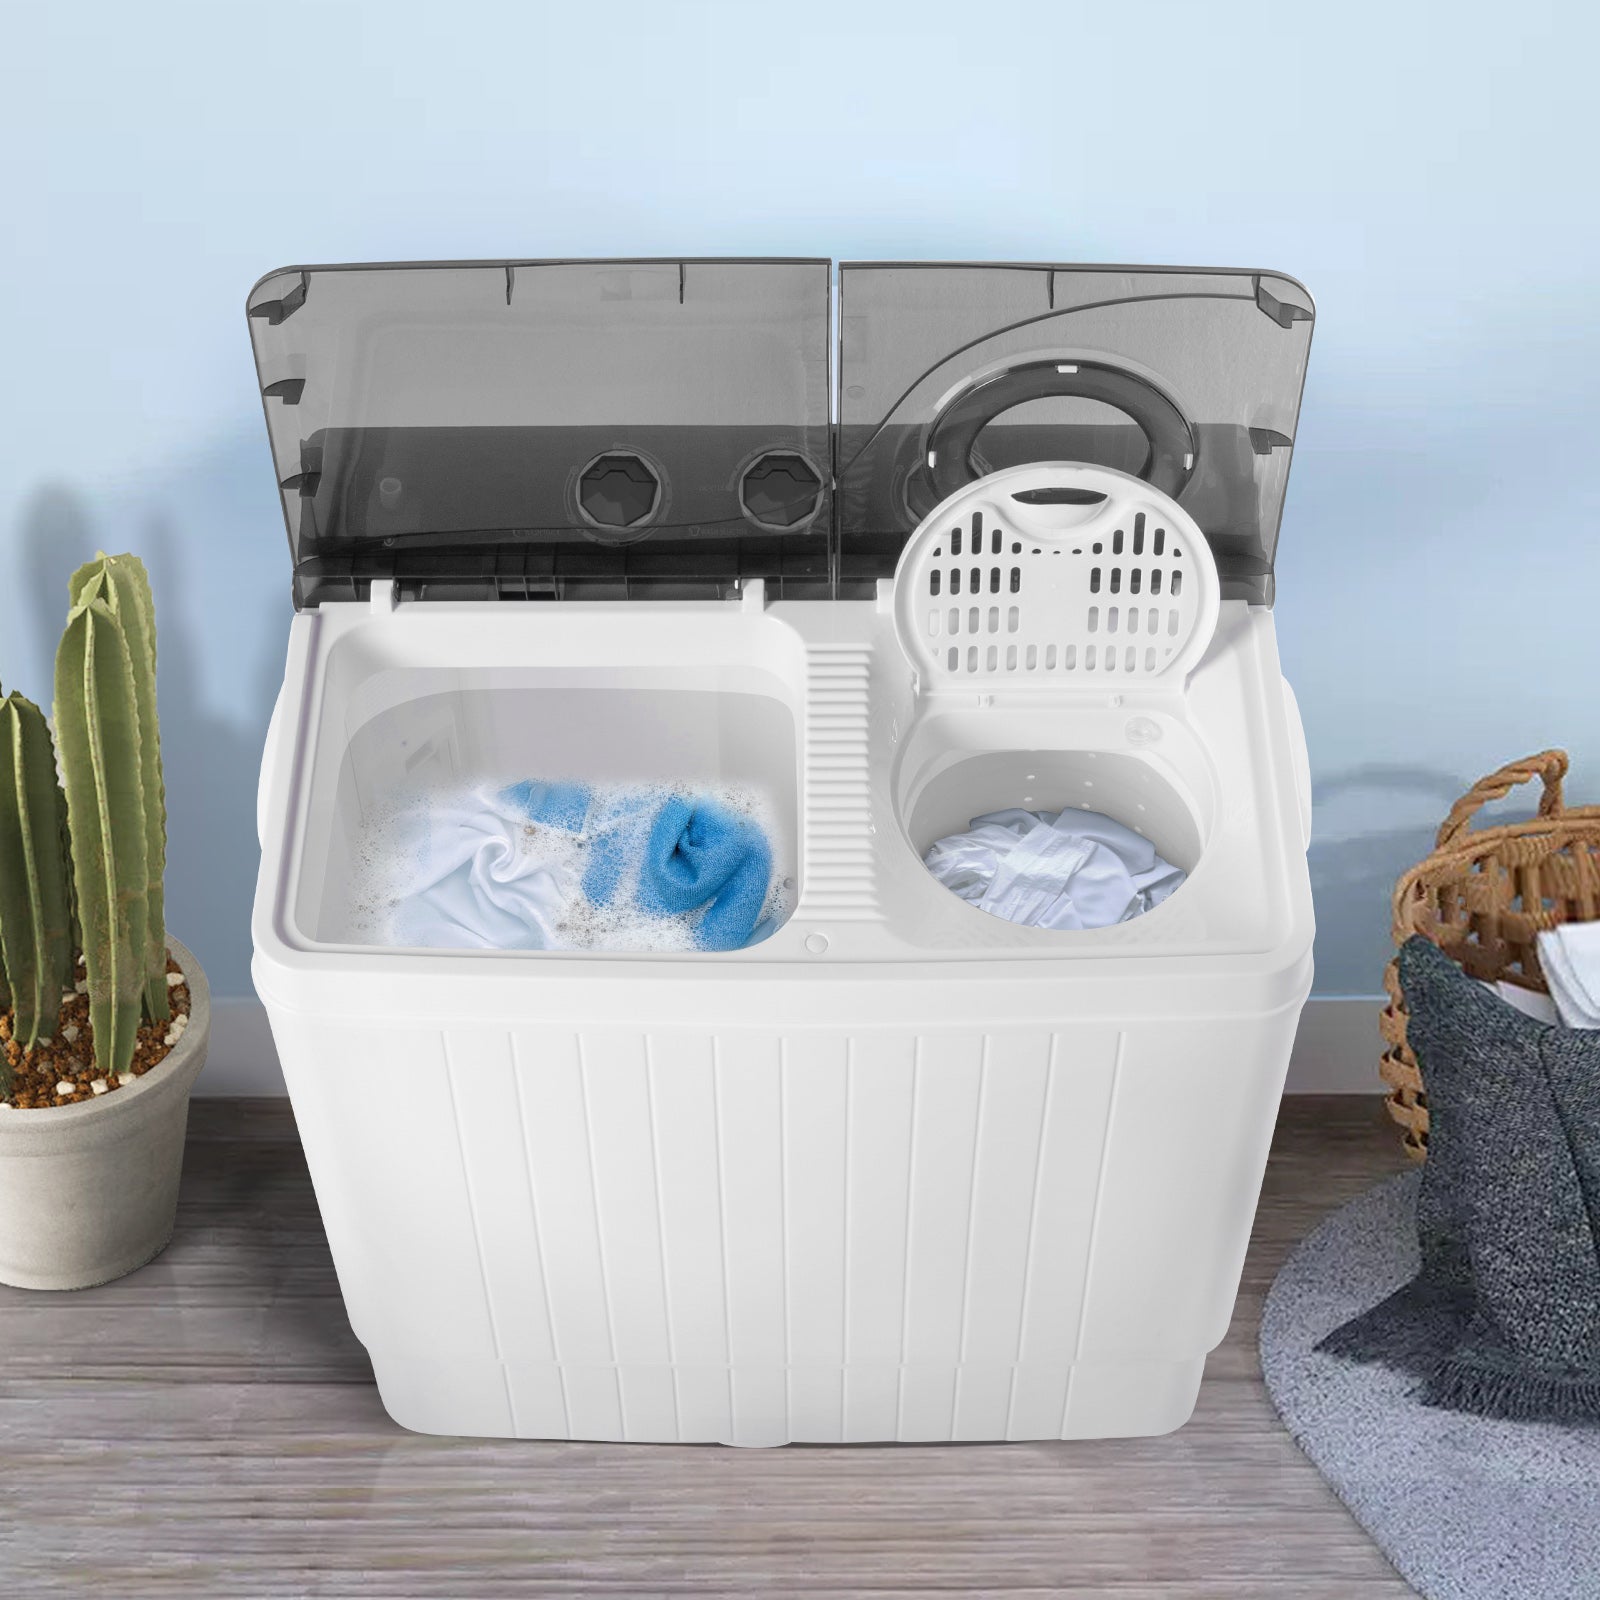 Buy wholesale 26 pound portable semi-automatic washing machine with  built-in drain pump grey